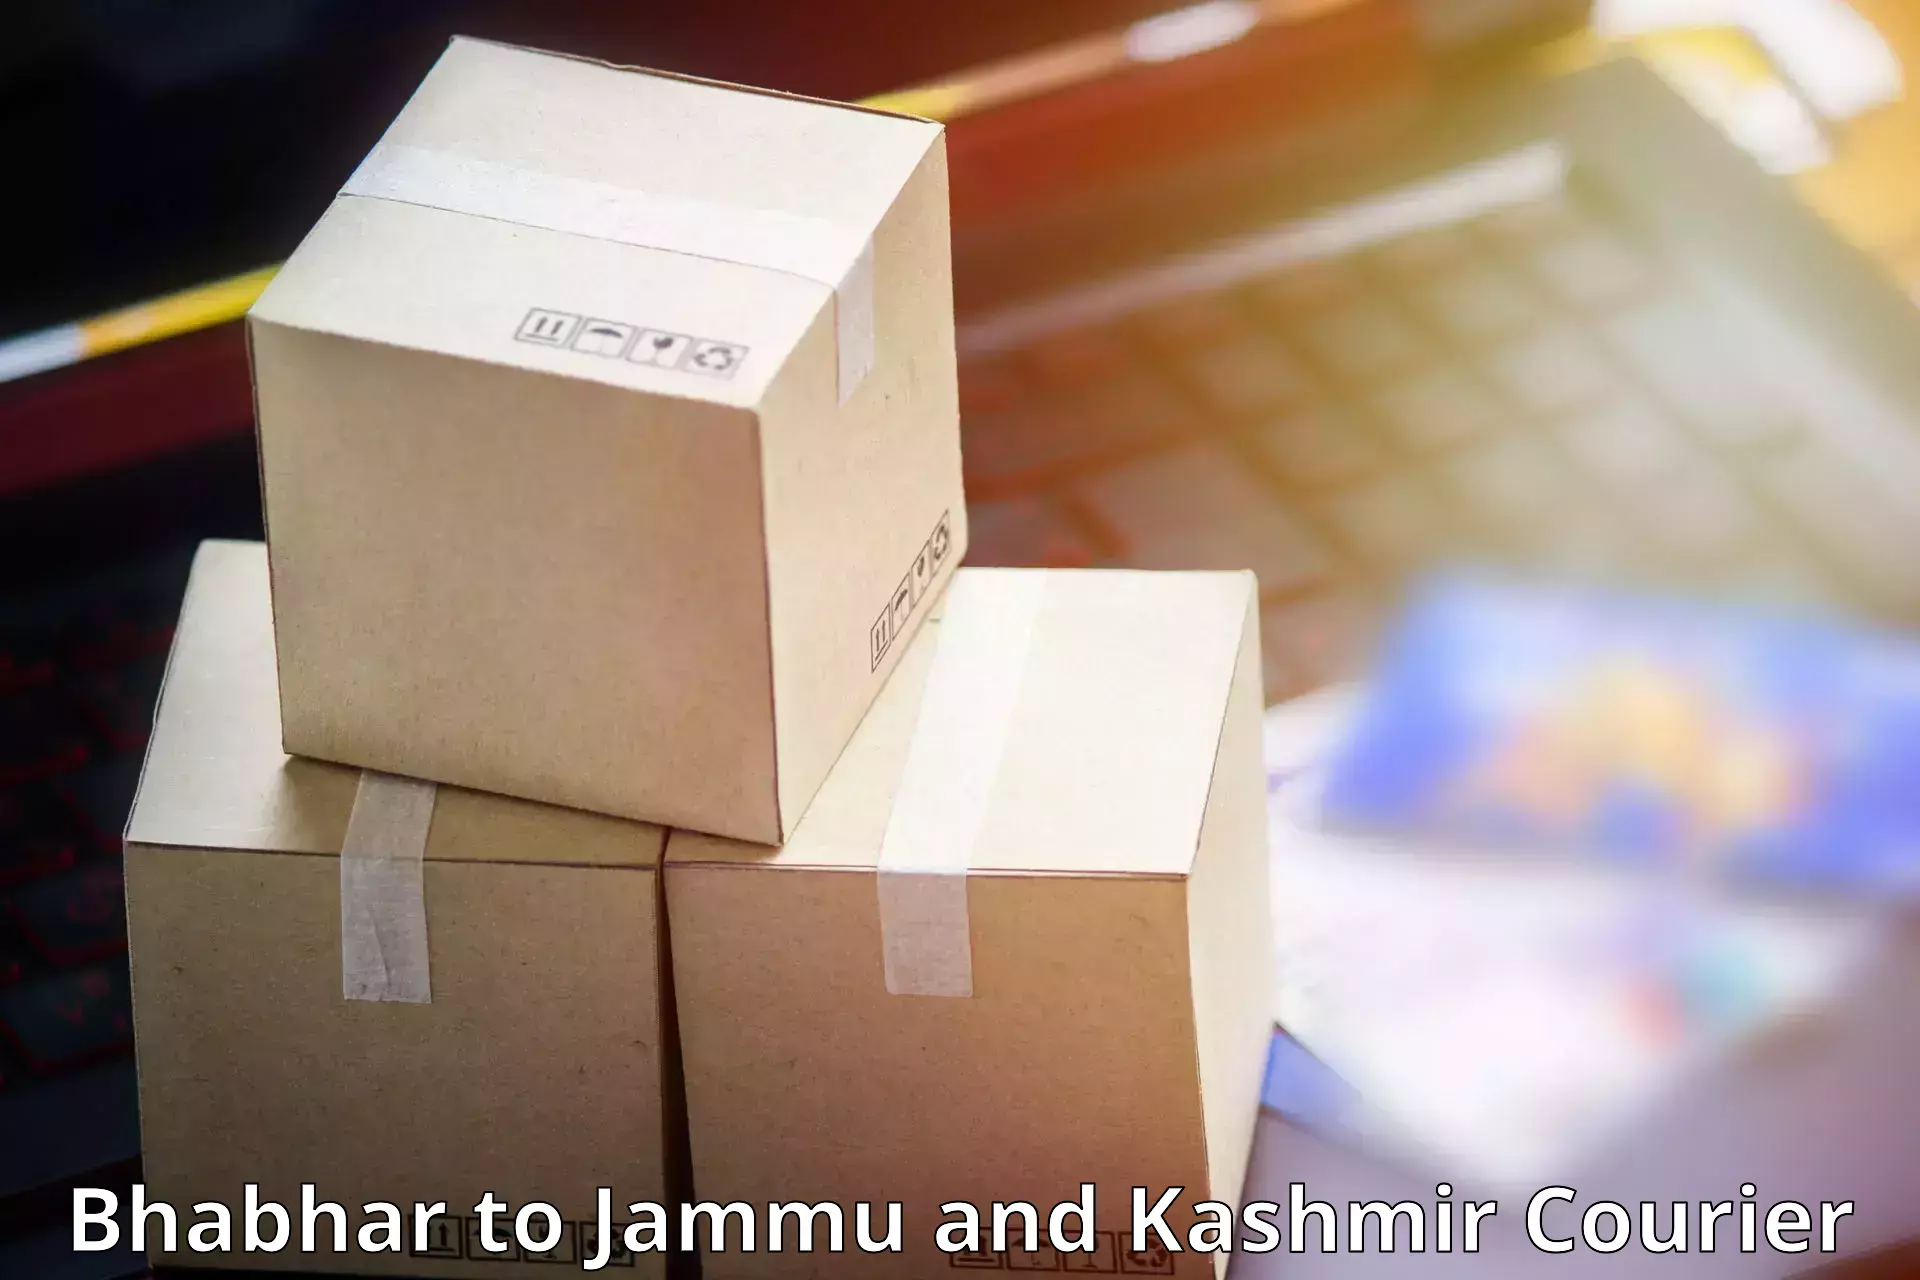 Next-day delivery options Bhabhar to Anantnag